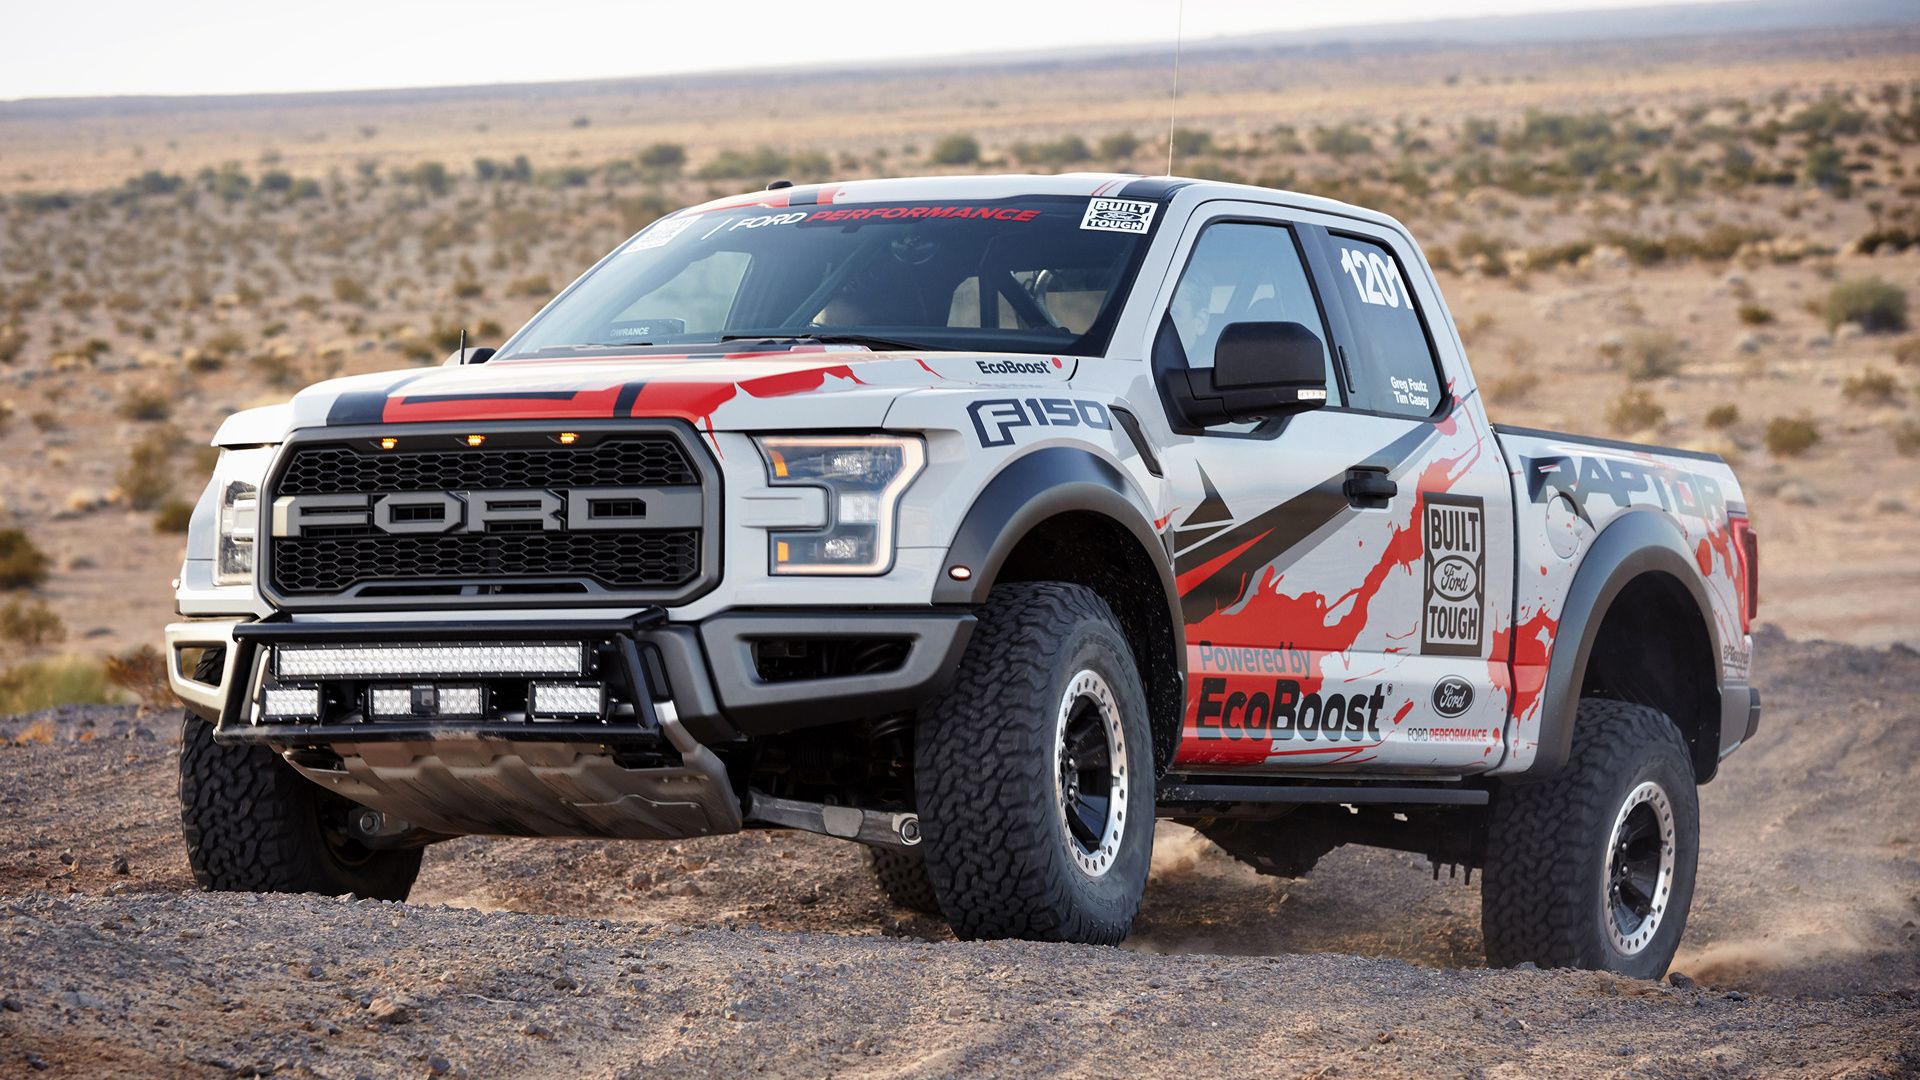 Ford F 150 Raptor Race Truck And HD Image. Car